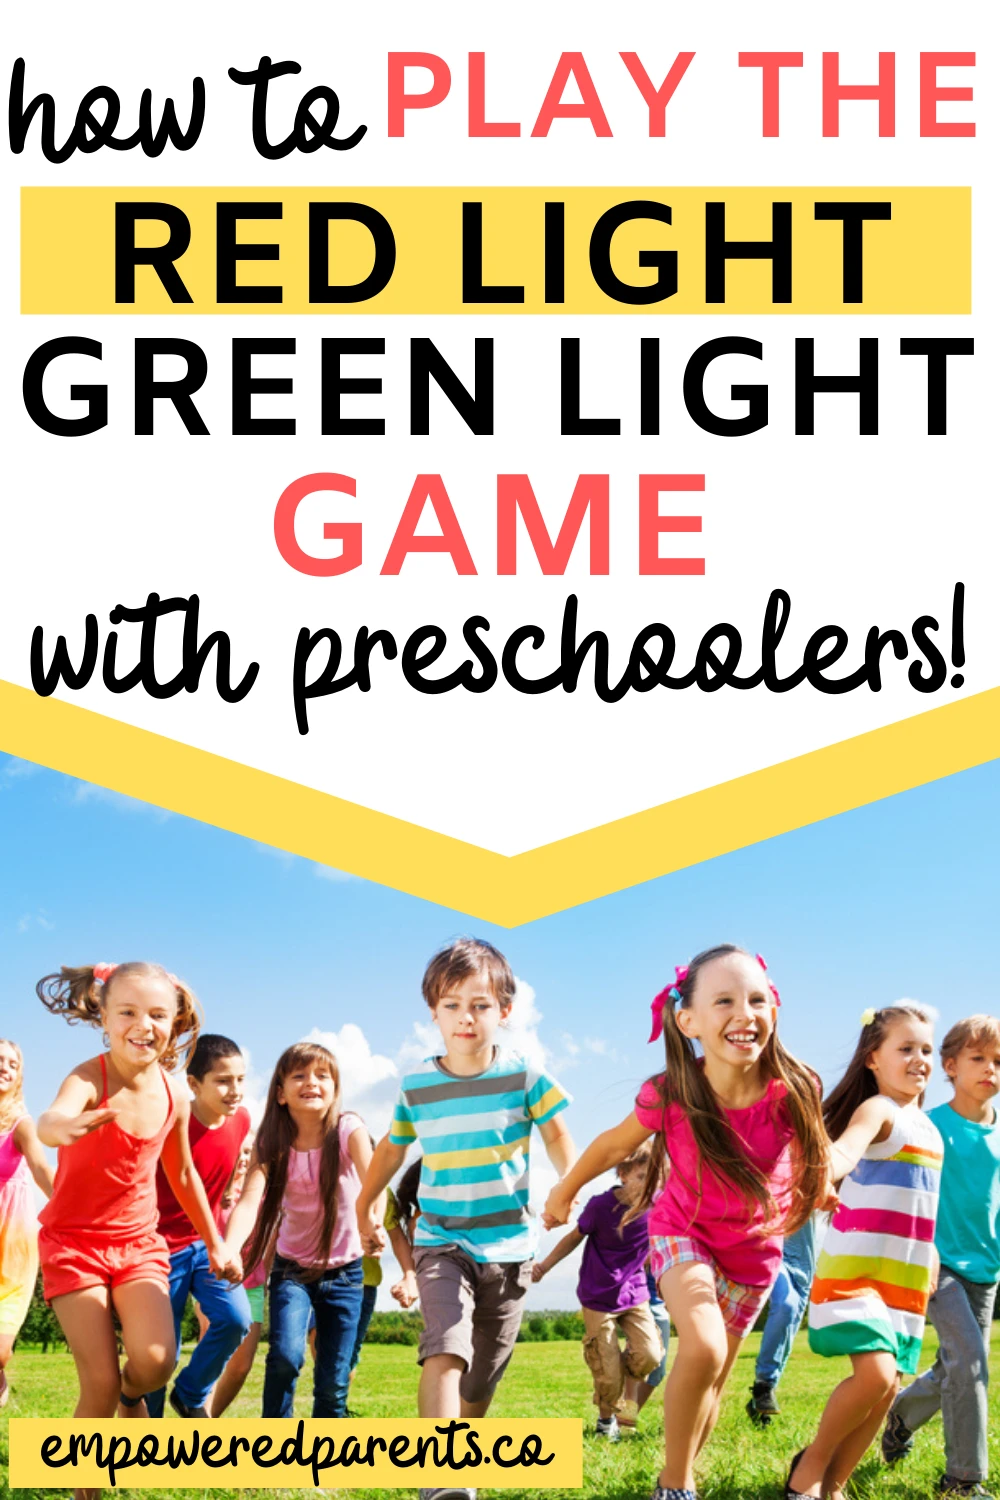 Children holding hands and running. Text reads "How to play the red light green light game with preschoolers".